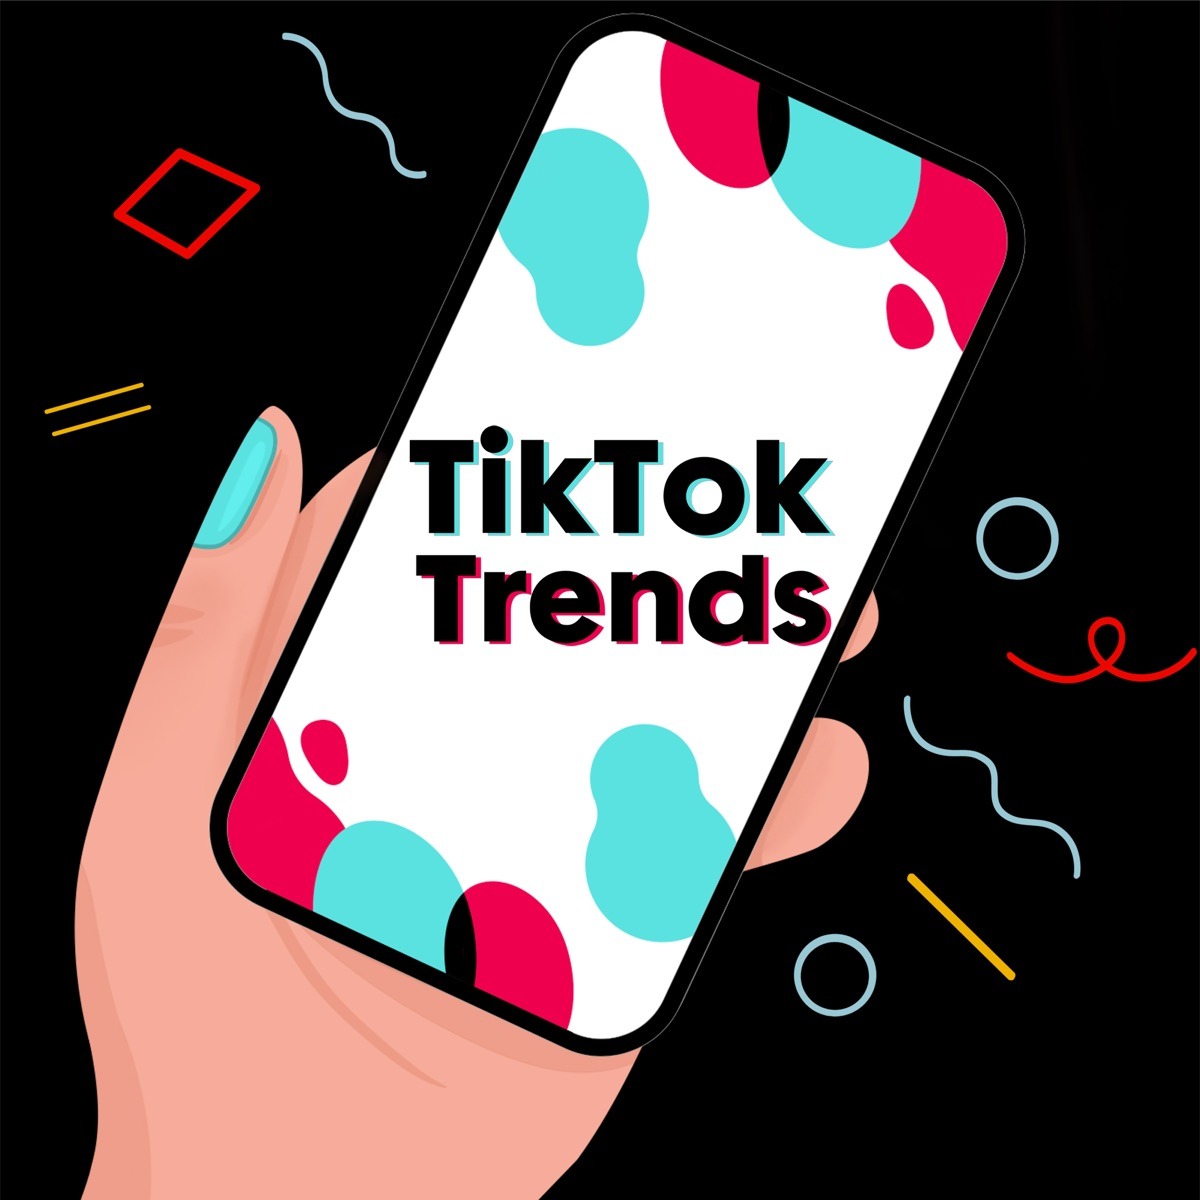 In this article, we focused on what is TikTok trends, how TikTok trends discovery works, and how to utilize TikTok trends to improve your brand exposure.